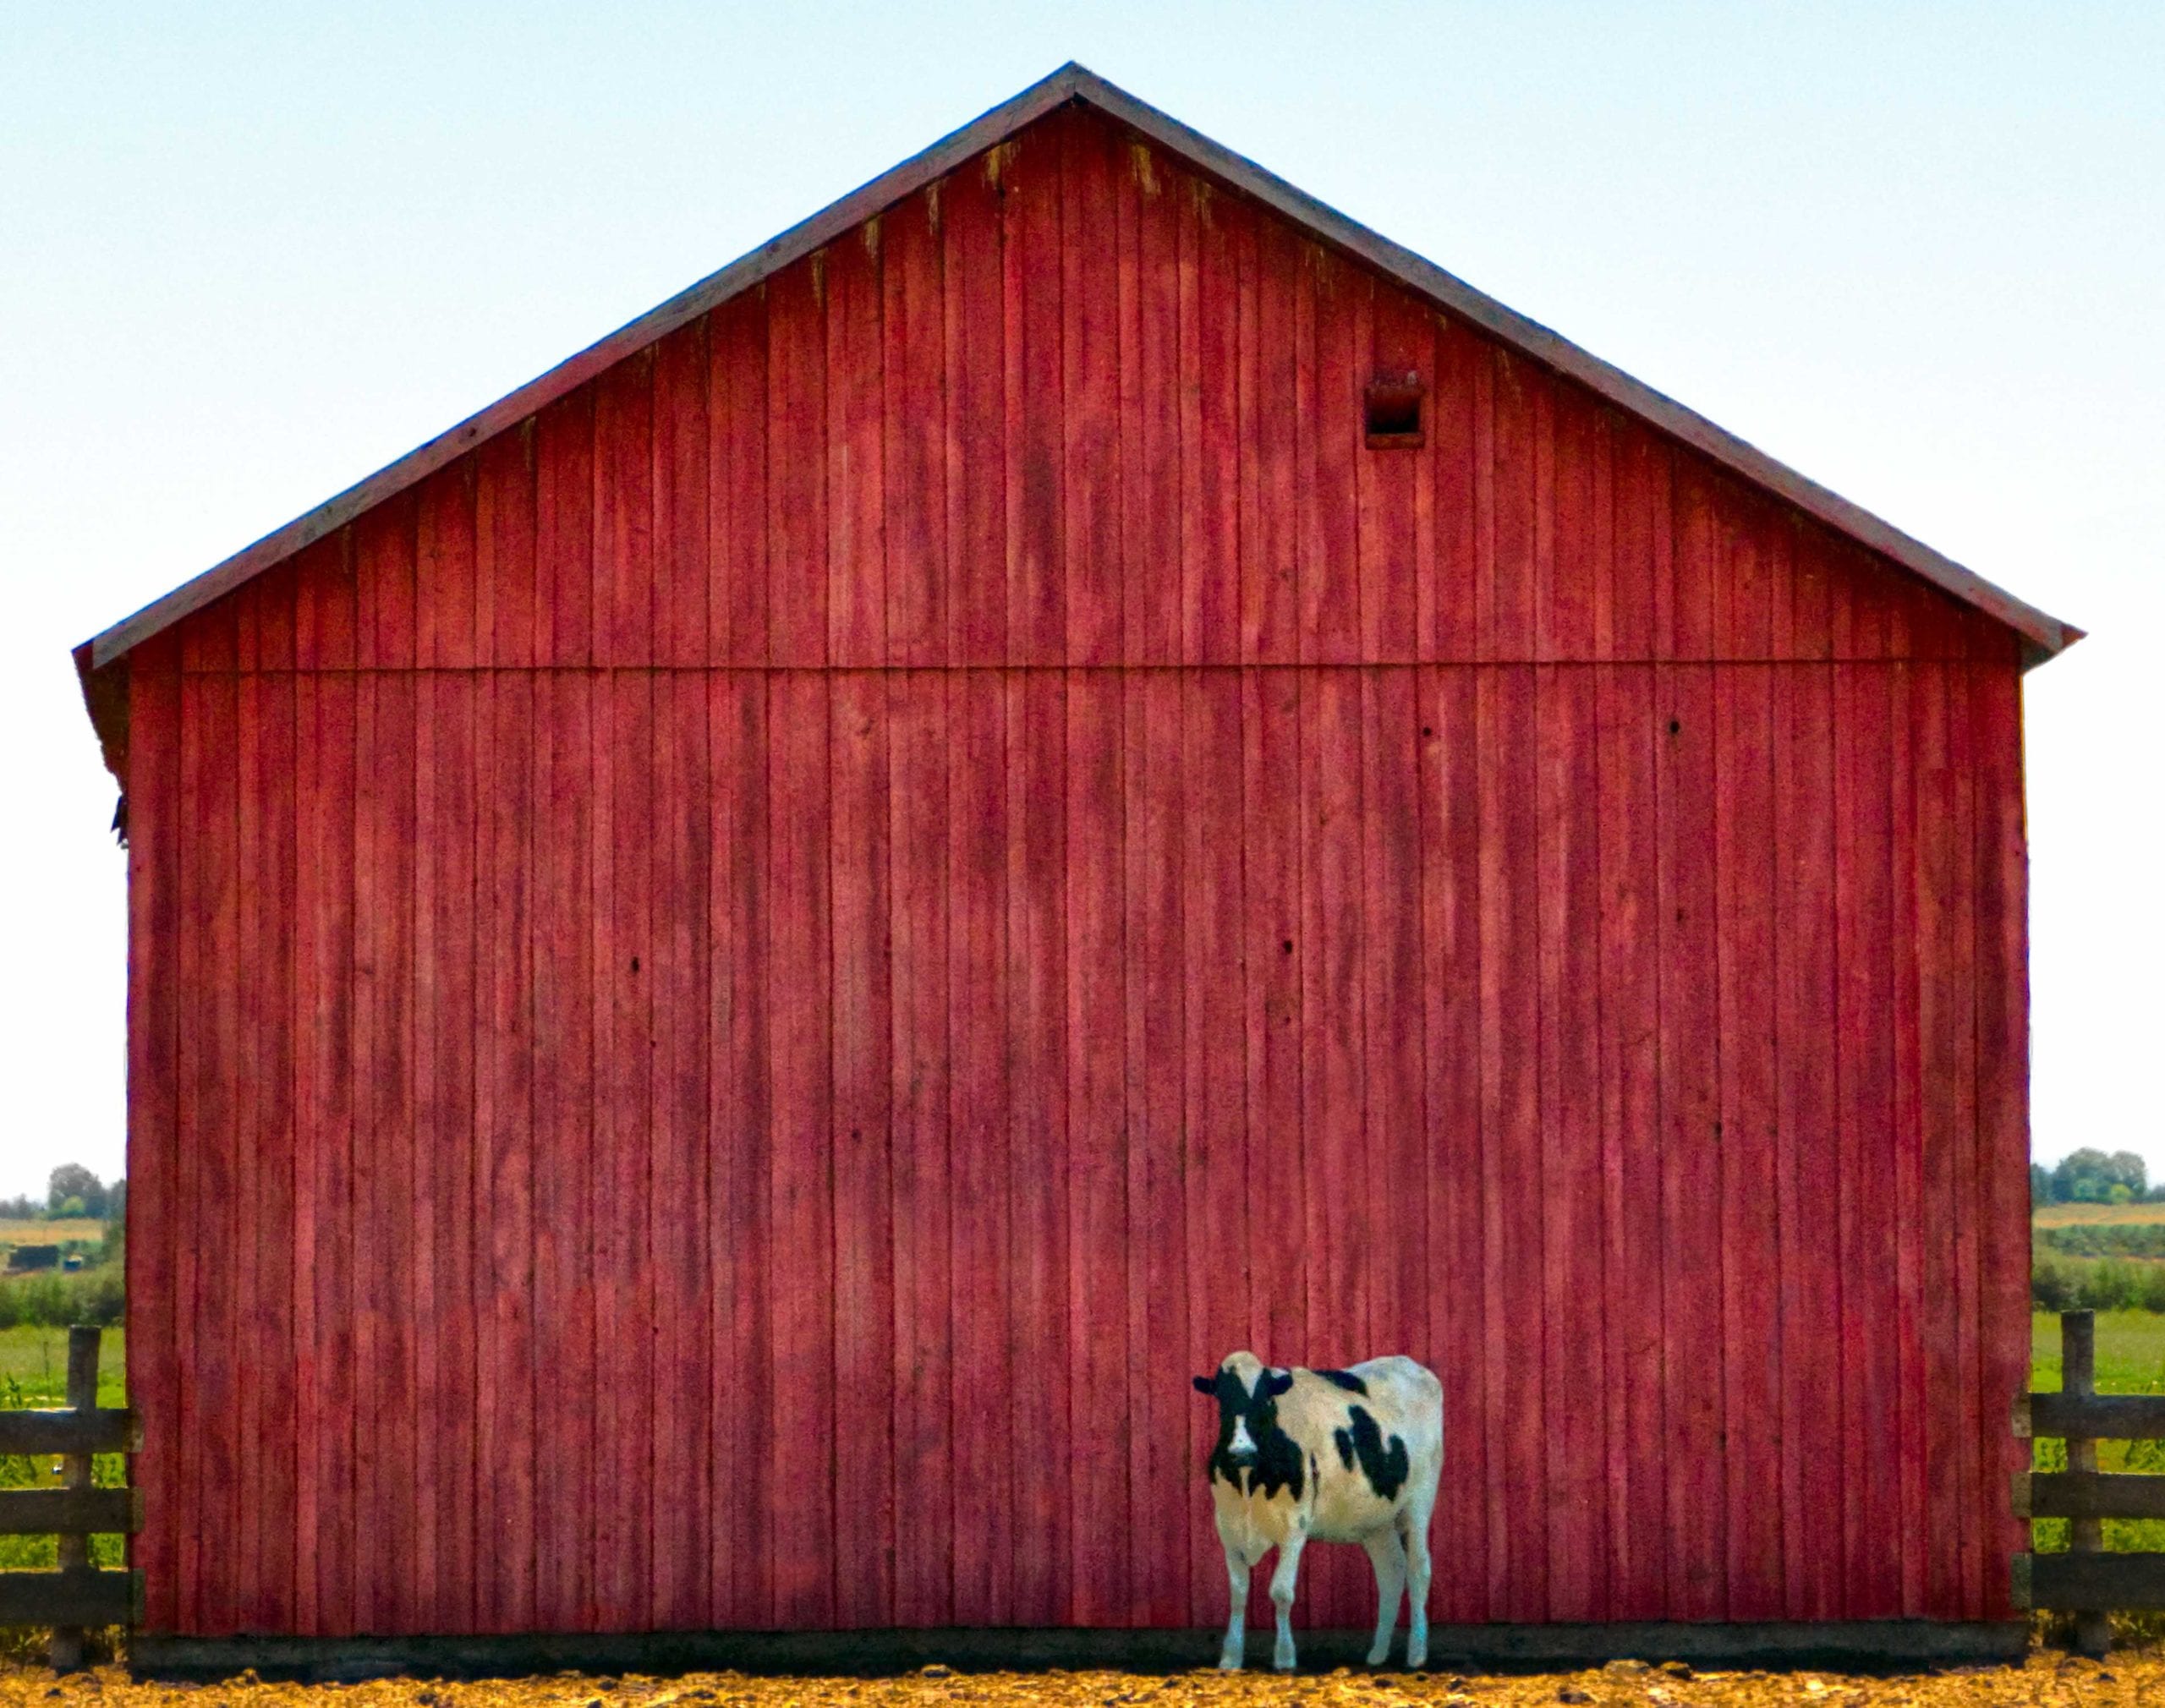 Visit Us For Americana Gems Like This Red Barn Photo